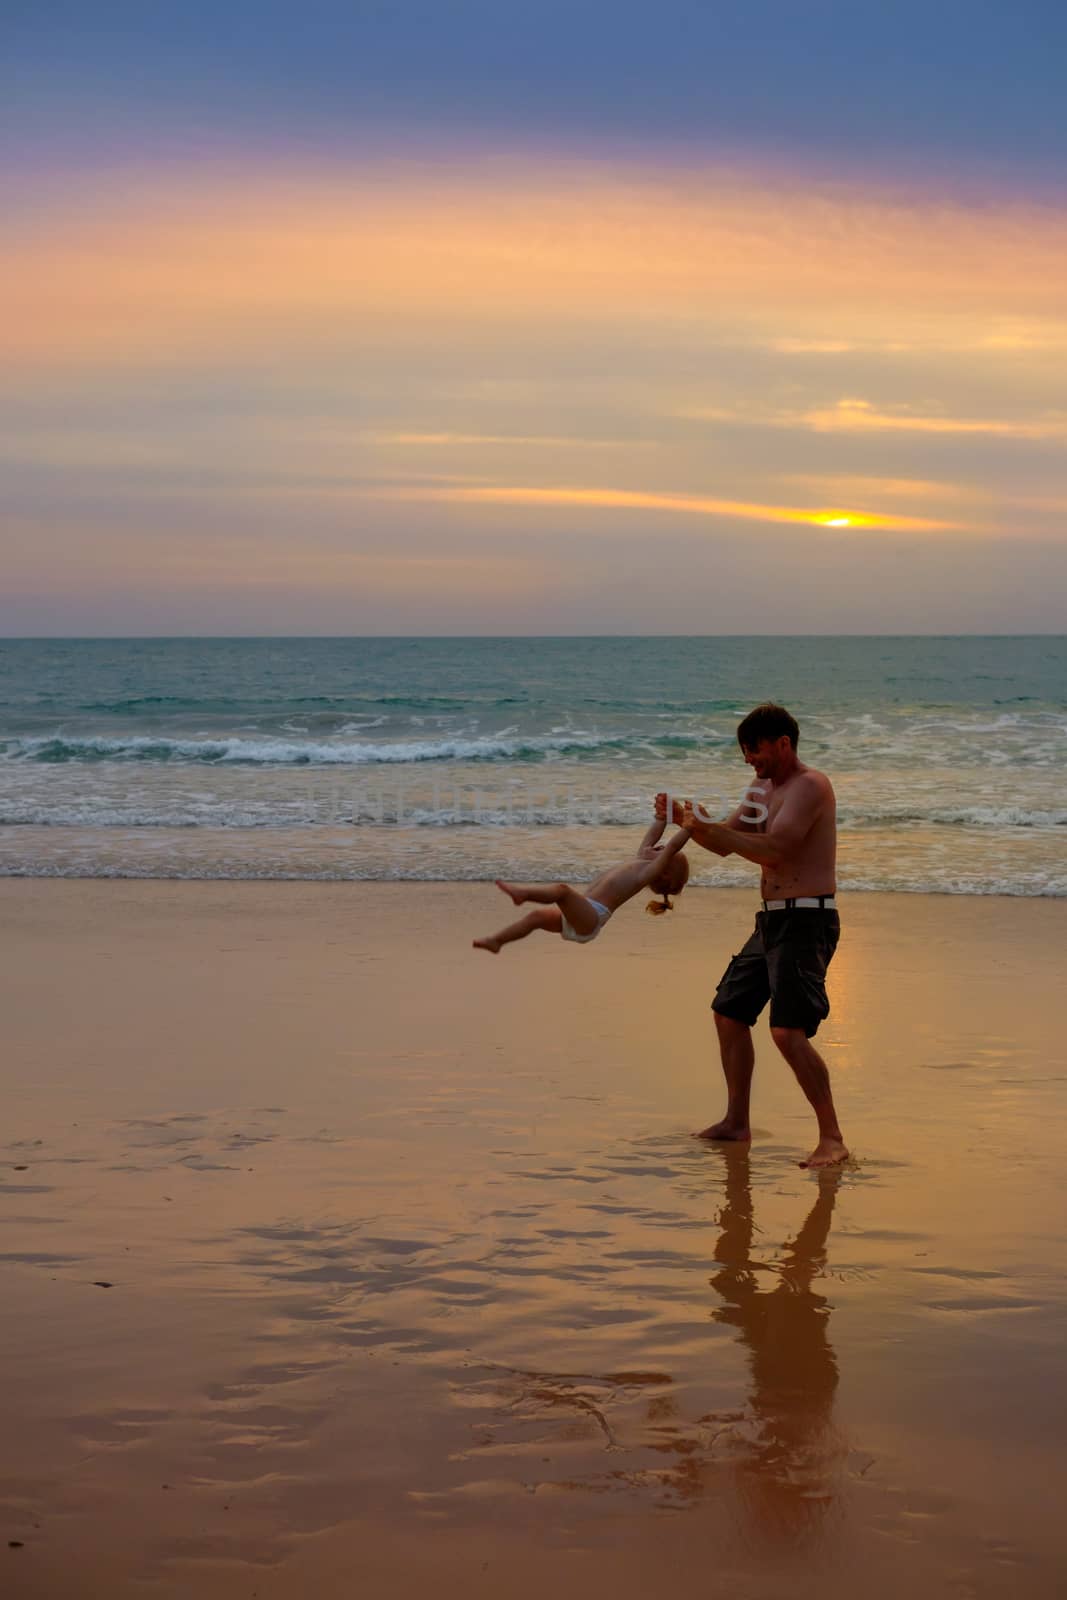 Father plays with his daugter at the beach near the sea at the s by rainfallsup